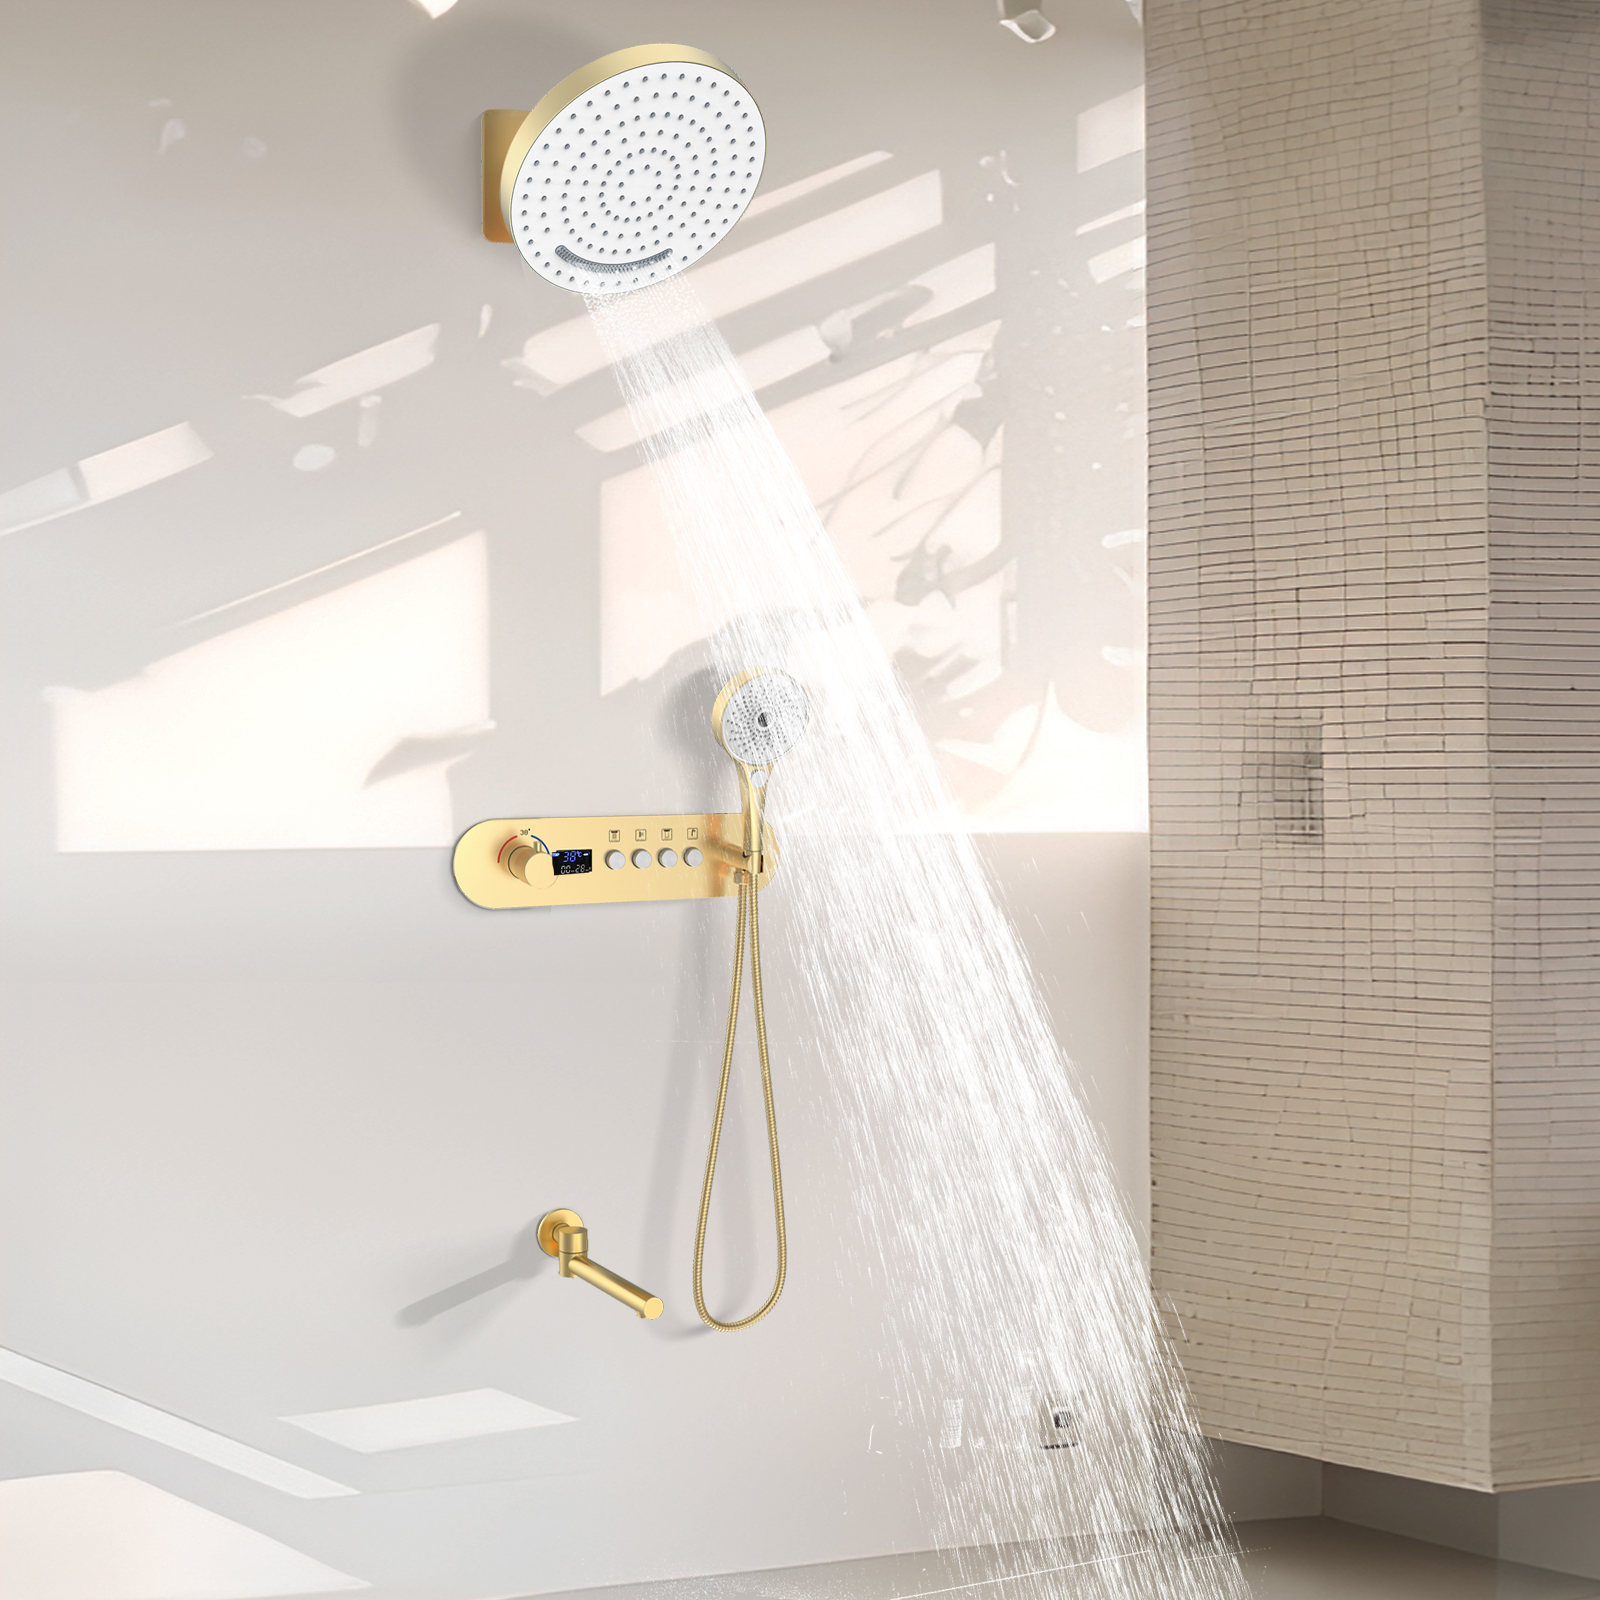 Bathroom Rainfall Waterfall Hengmohon Faucet with Shower Spray And Outlet Function Shower